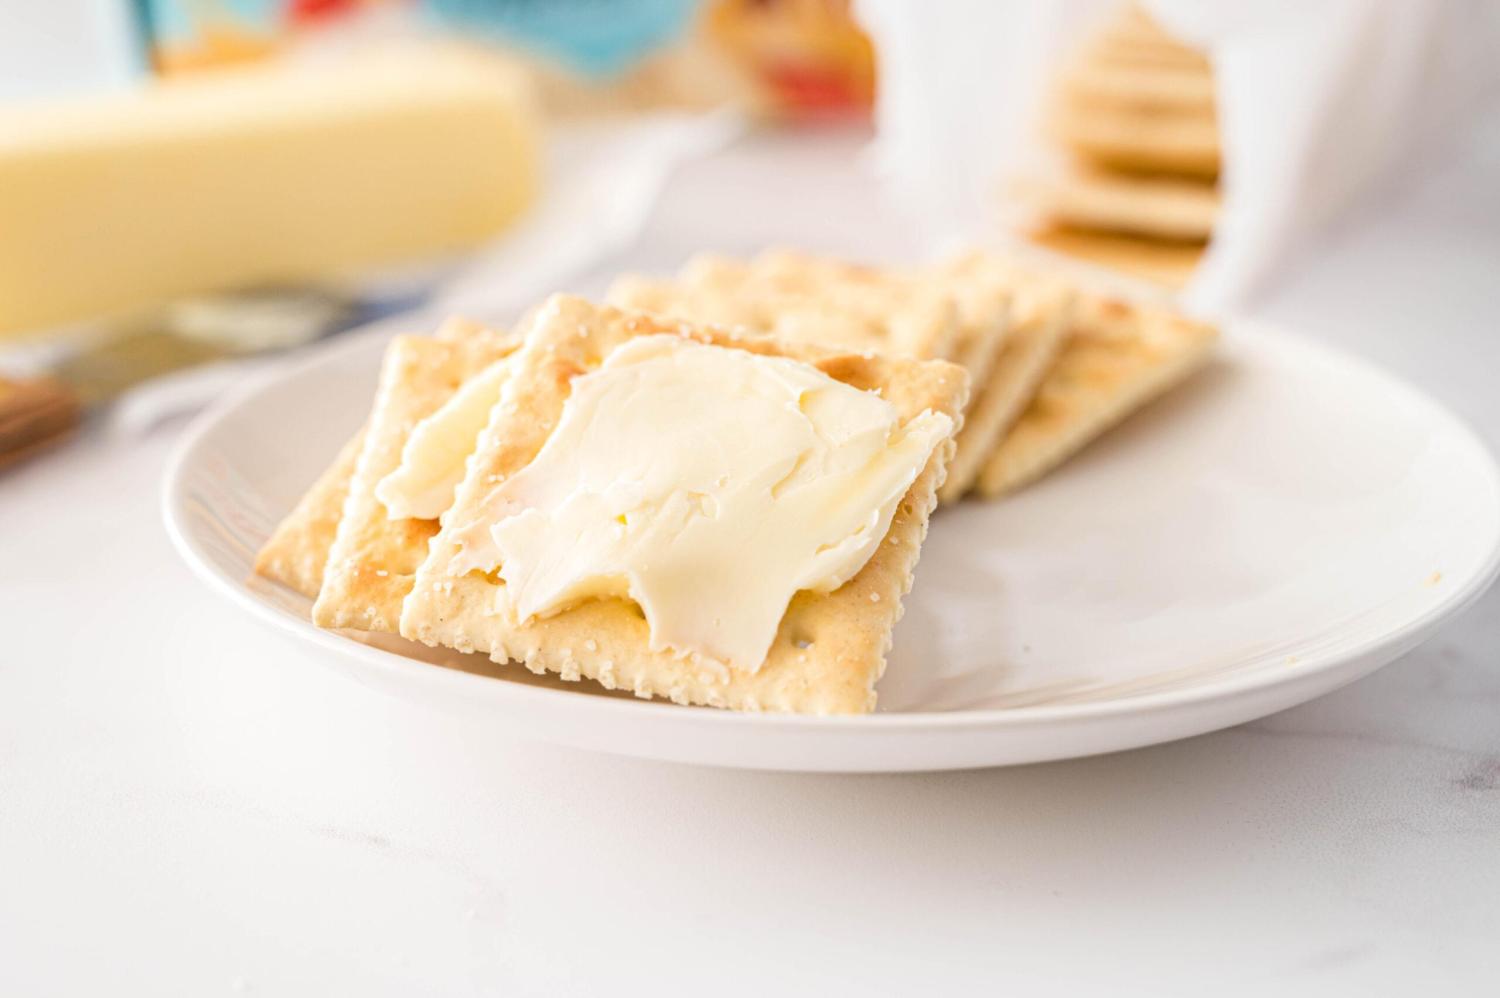 'buttered saltine crackers' are the hot new snack trend everyone is talking about